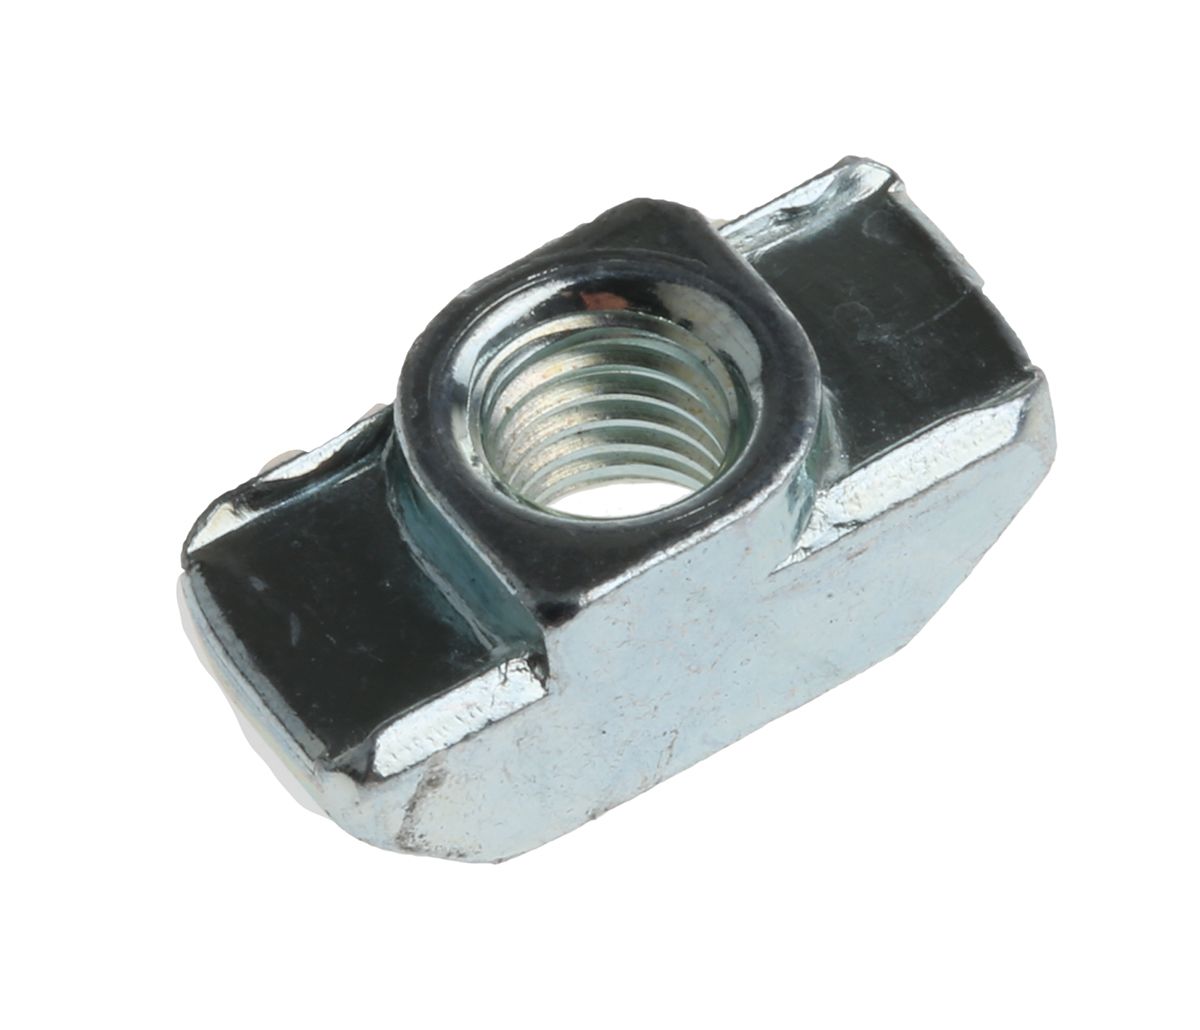 Bosch Rexroth T-Slot Nut Connecting Component, strut profile 30 mm, groove Size 8mm